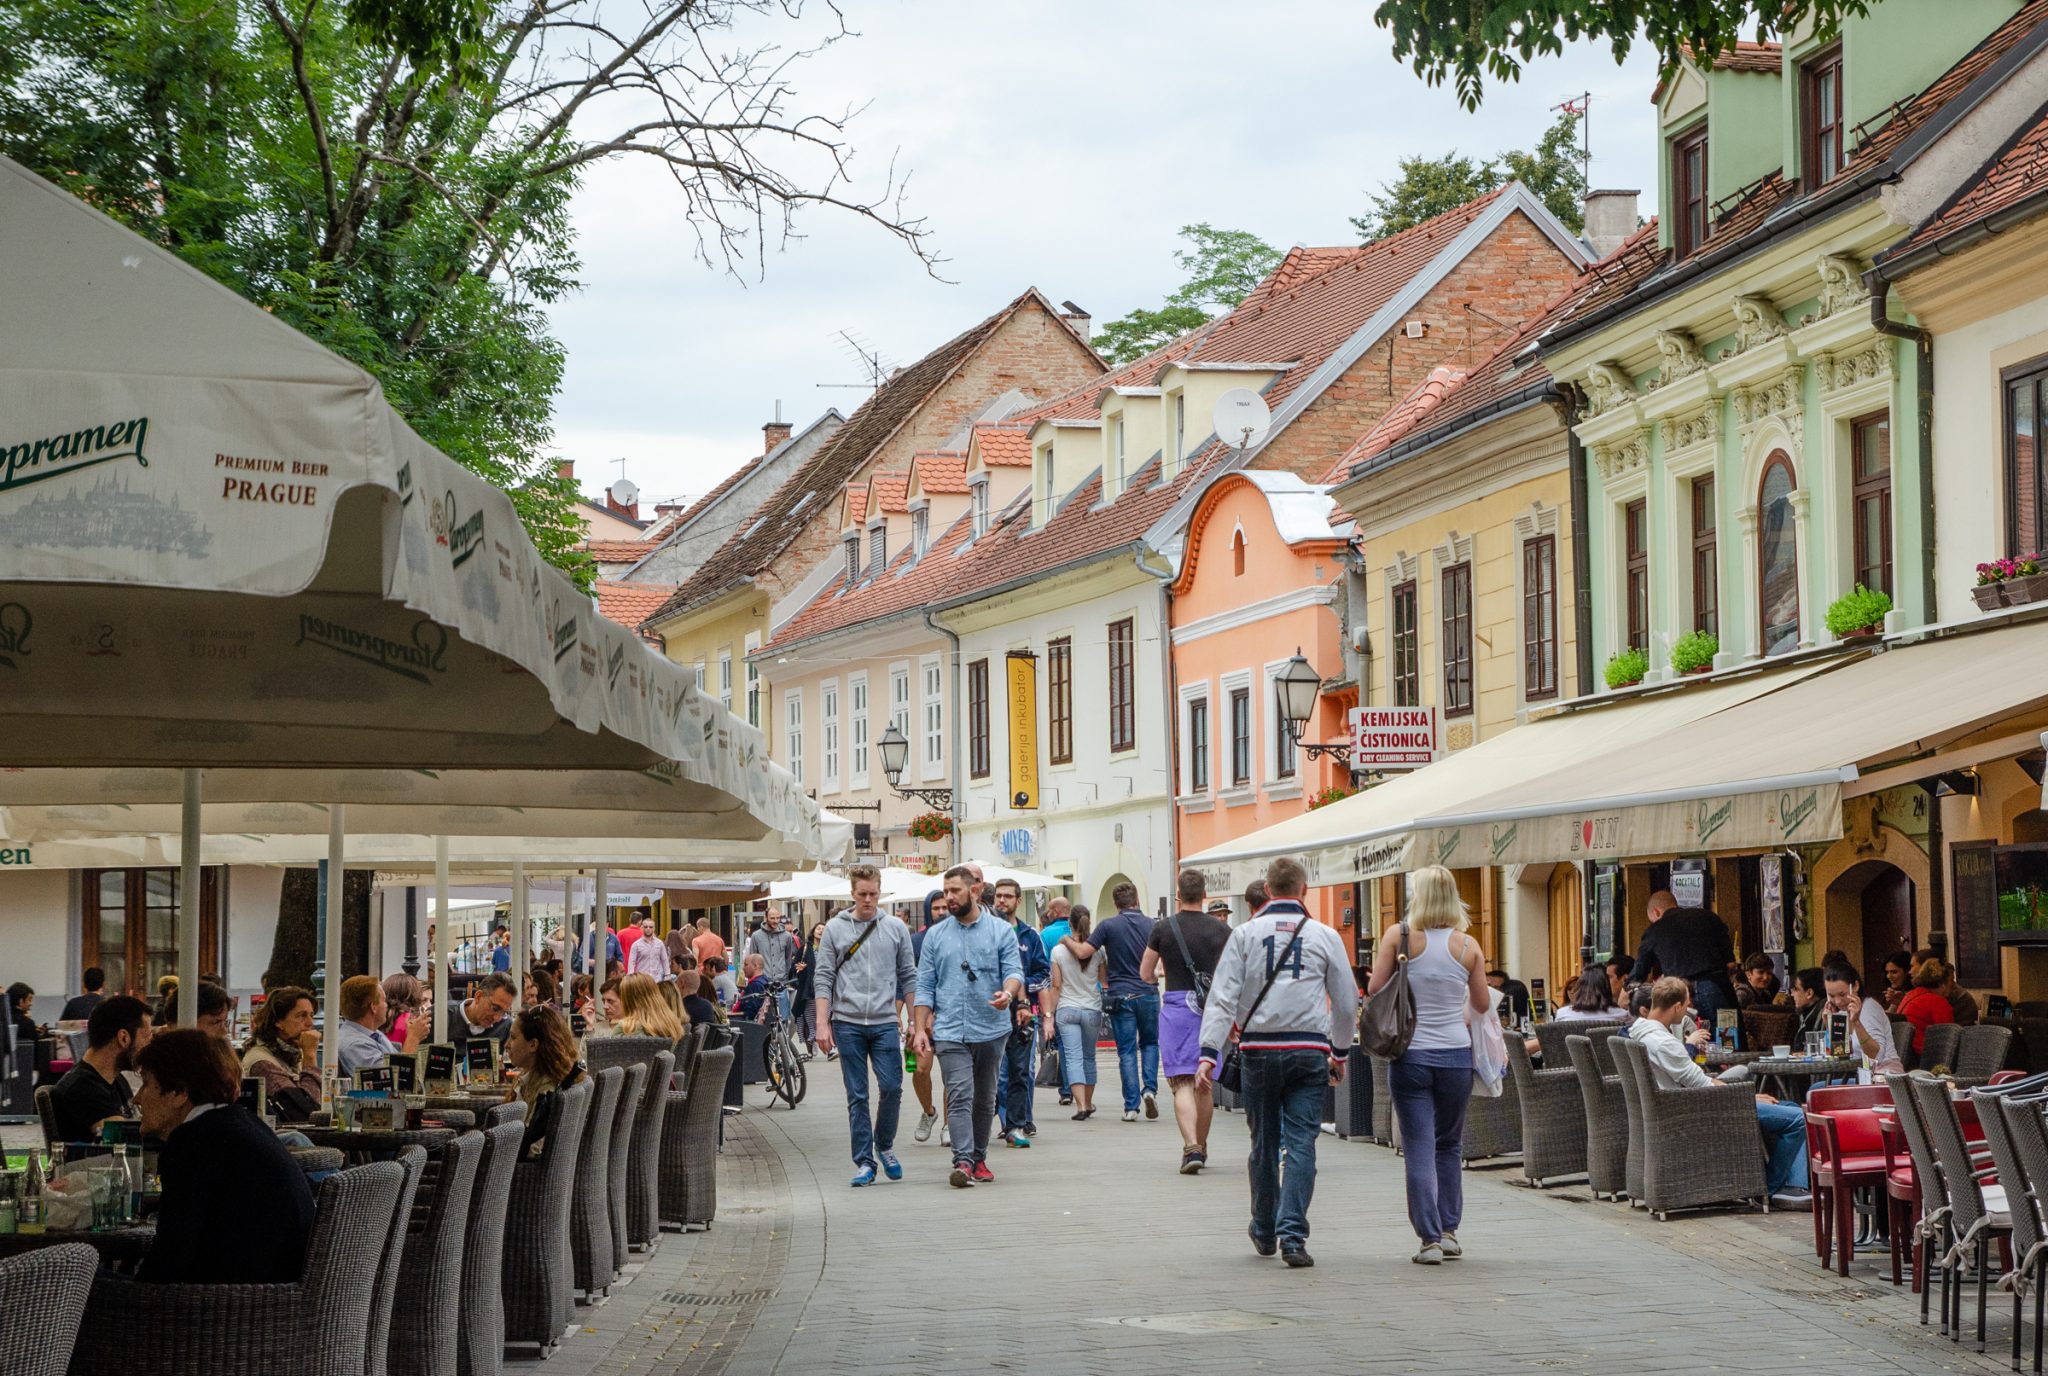 21 Unforgettable Things To Do in Zagreb, Croatia